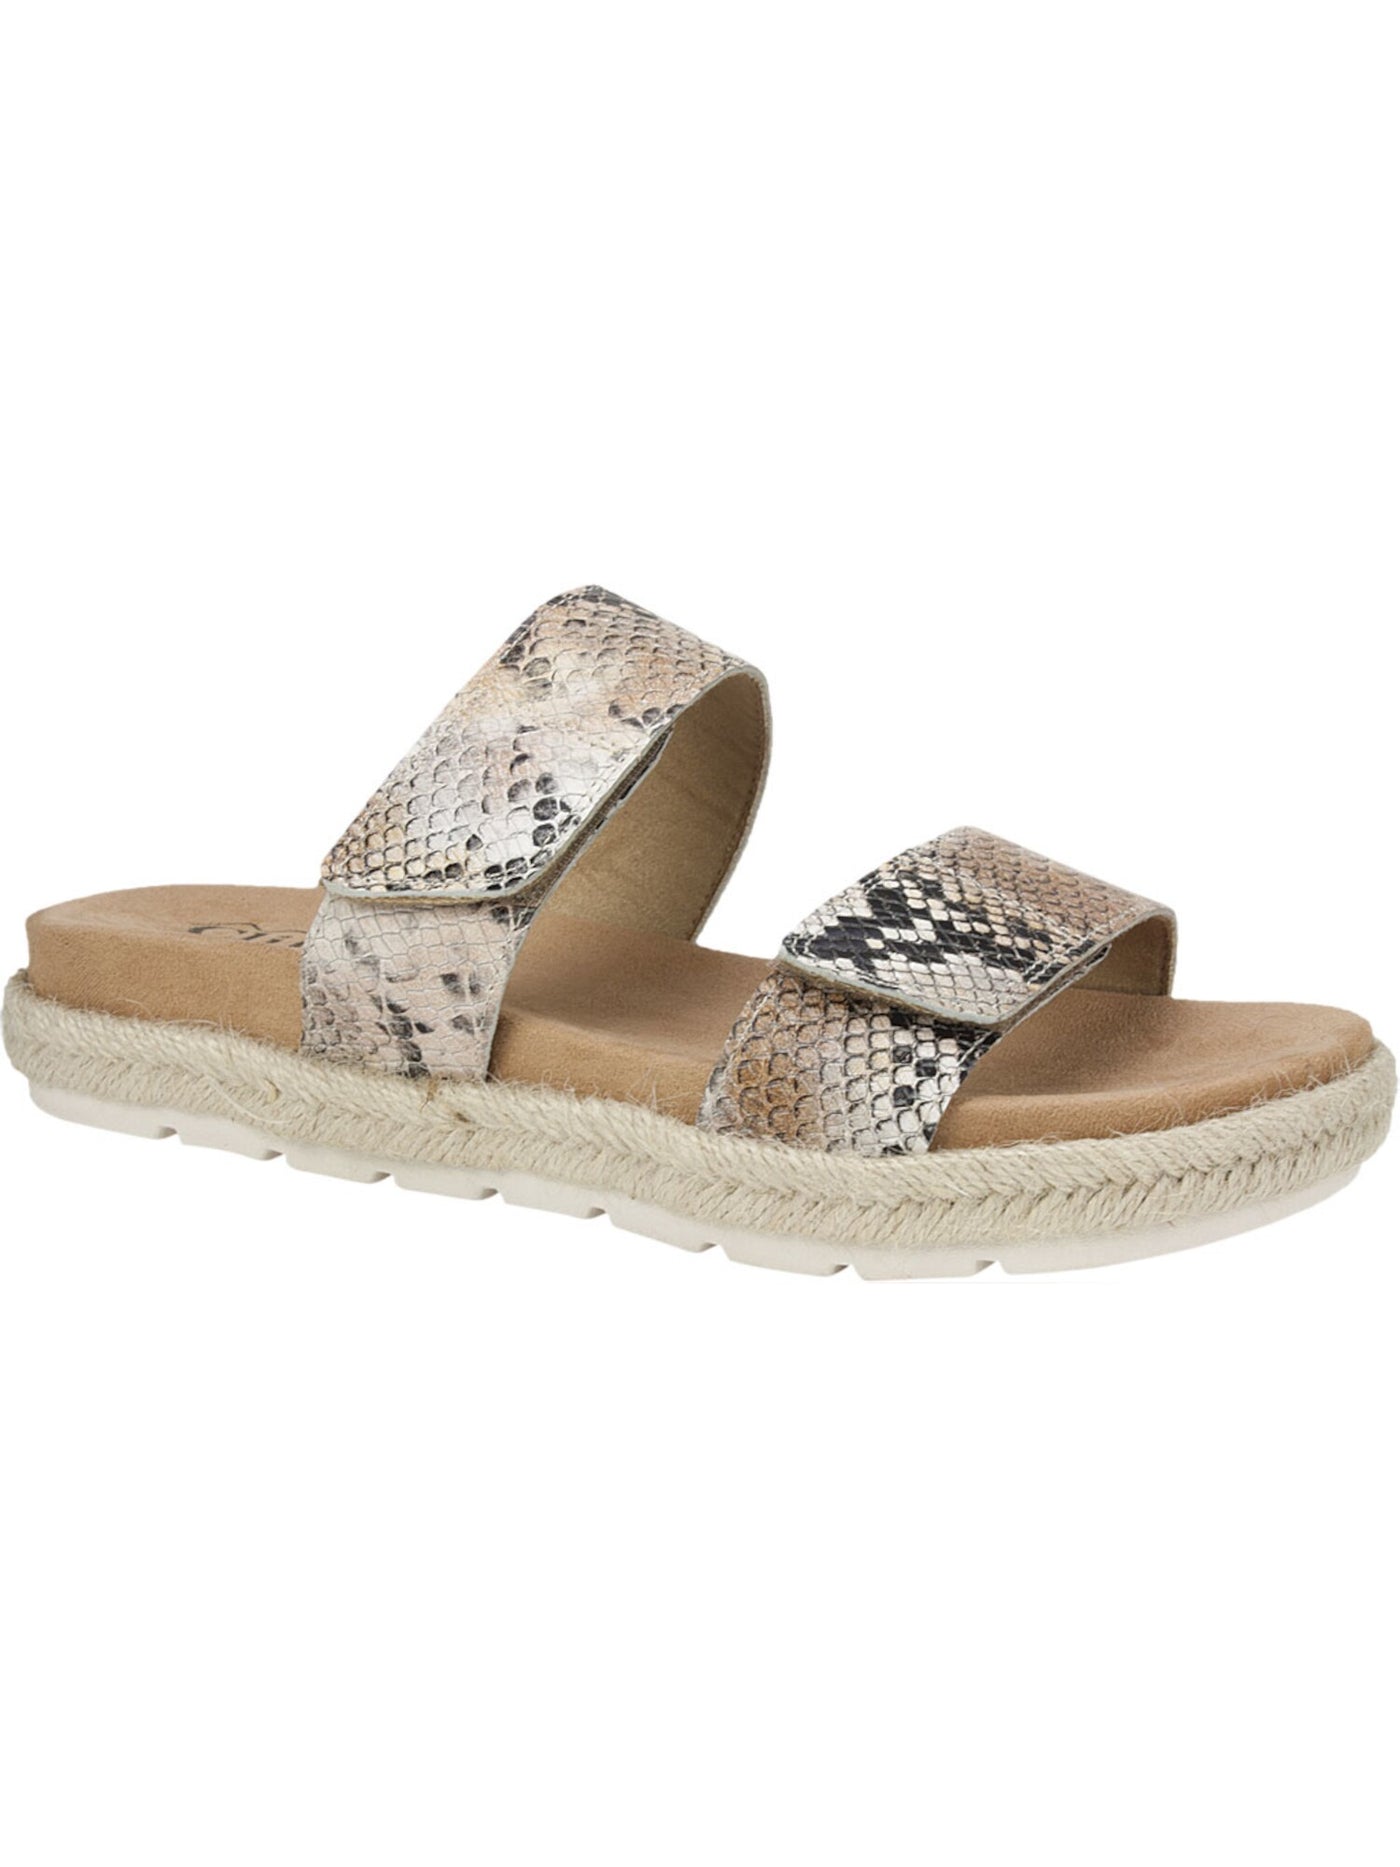 CLIFFS BY WHITE MOUNTAIN Womens Beige Snake Print 1" Platform Jute Wrapped Adjustable Cushioned Tionna Round Toe Wedge Leather Slide Sandals Shoes 7.5 M